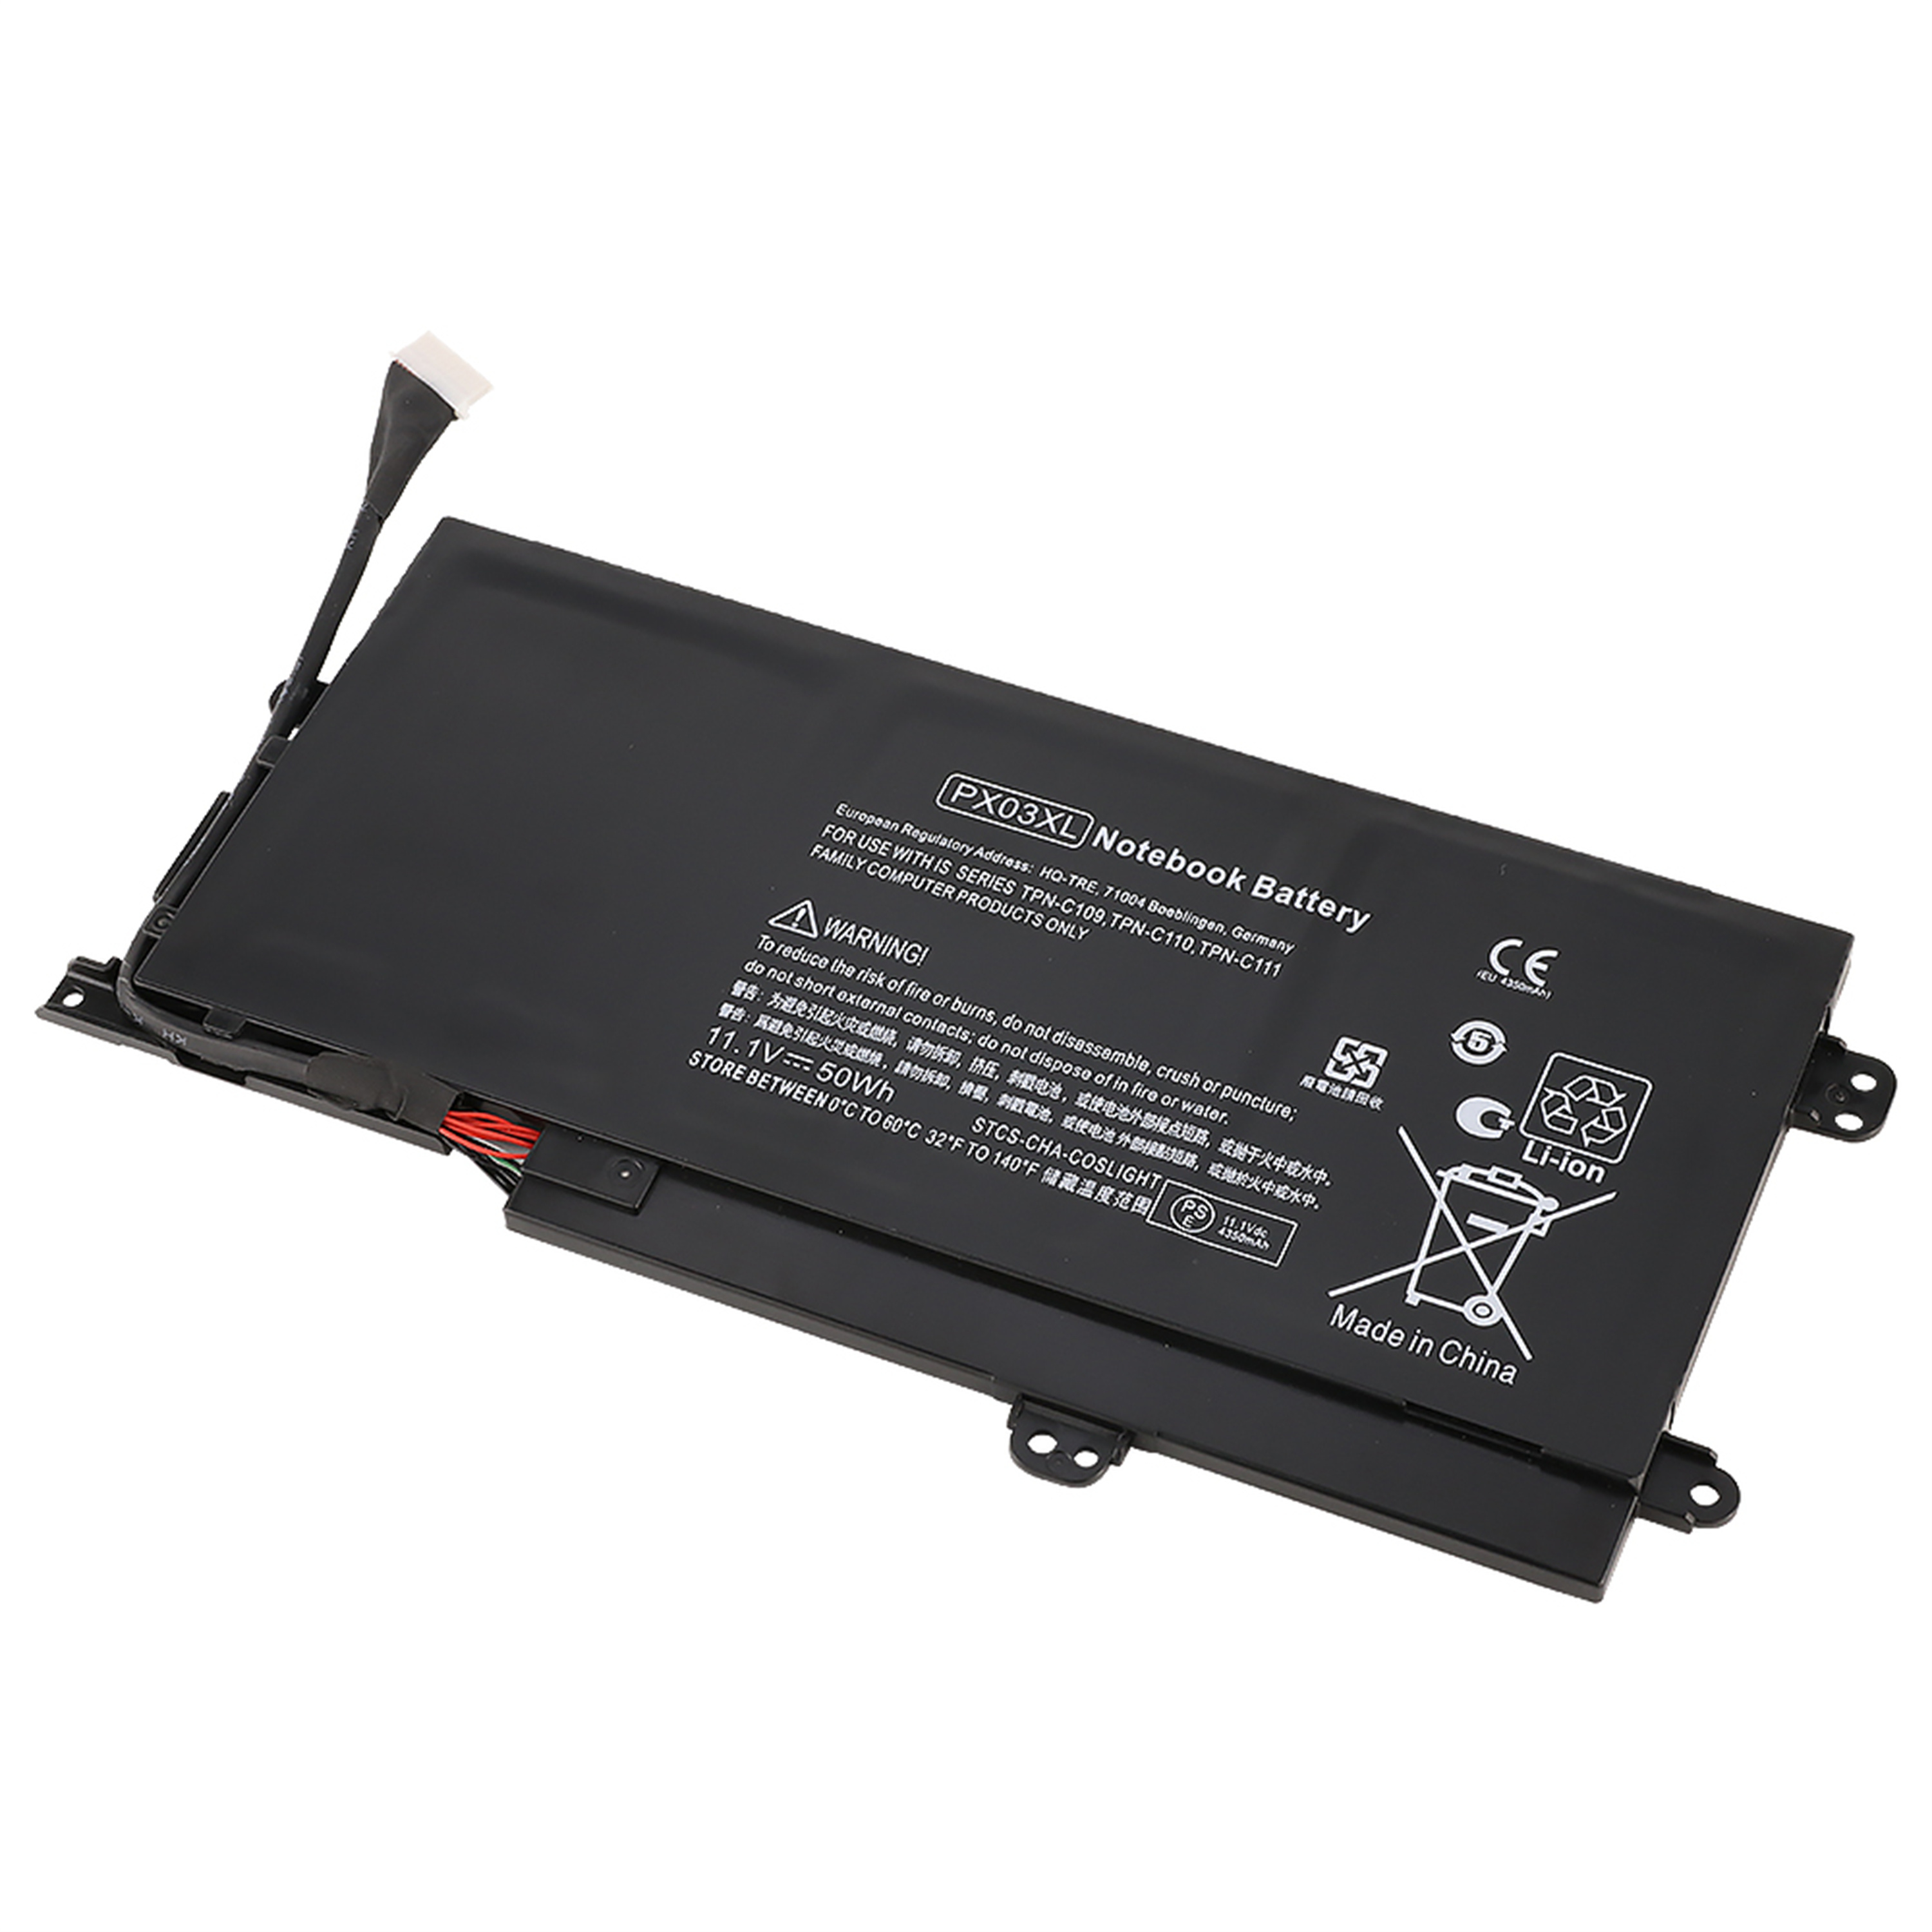 PX03XL rechargeable lithium ion Notebook battery Laptop battery for HP ENVY TOUCHSMART M6-K K010dx Series For HP ENVY 14 Sleekbook Series replacemnt battery PN: PX03XL K002TX K022DX HSTNN-DB4P 